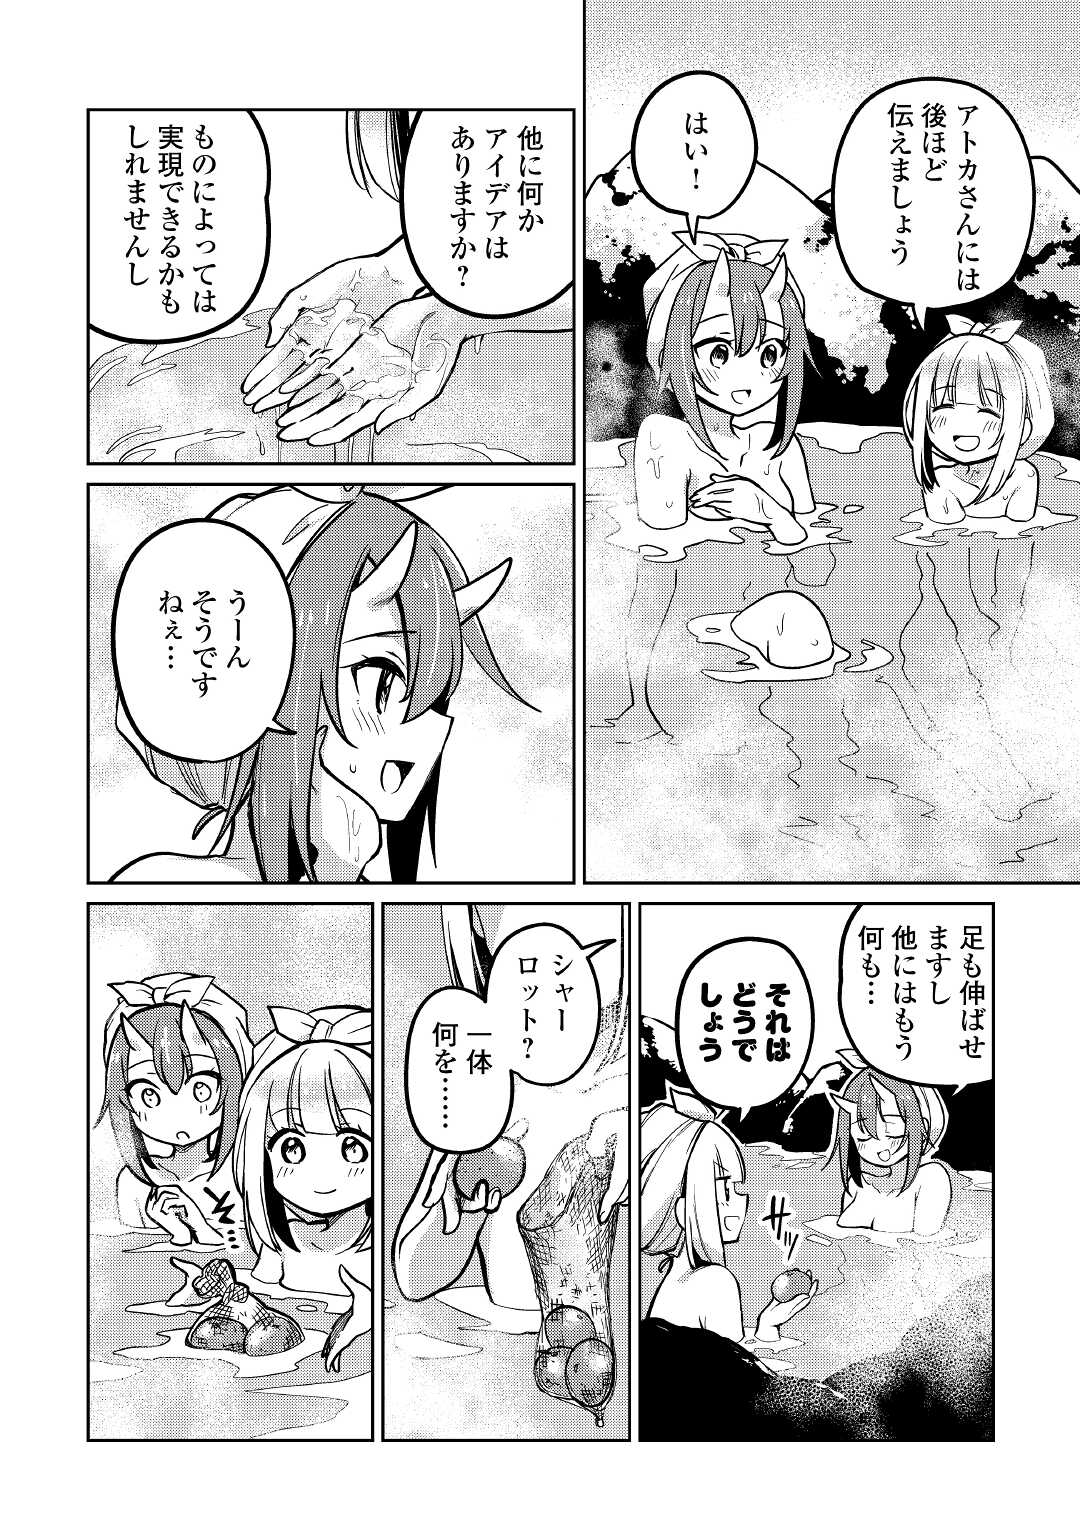 The Former Structural Researcher’s Story of Otherworldly Adventure 第41話 - Page 6